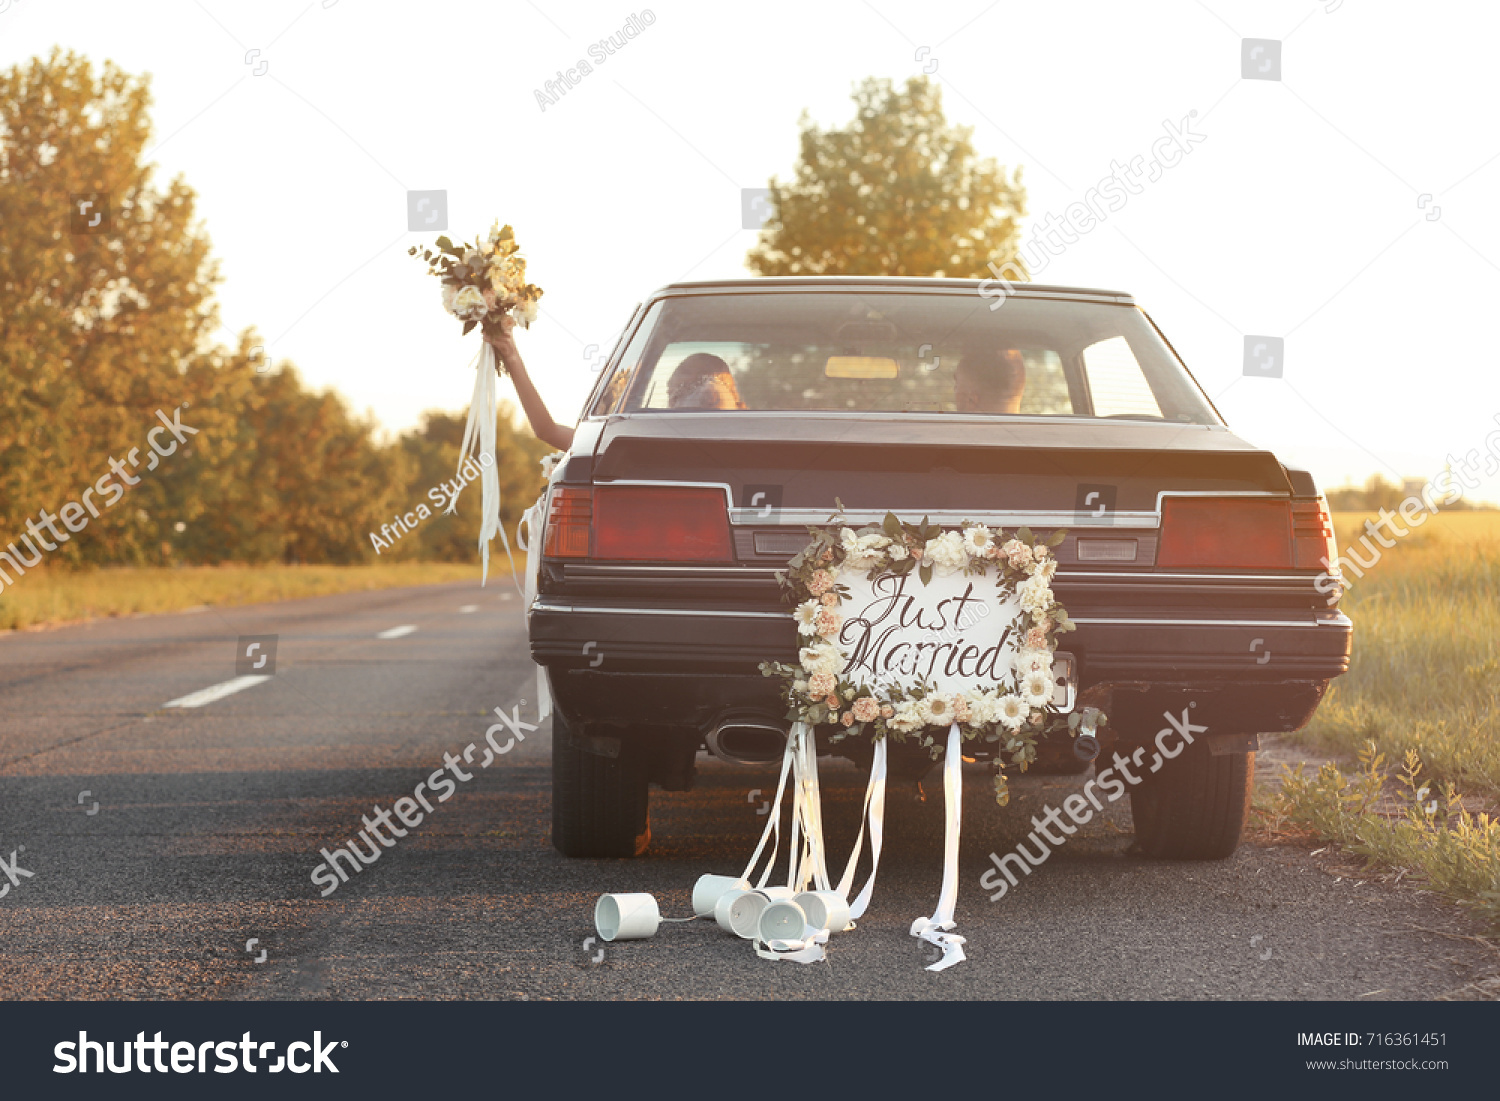 Happy wedding couple in decorated car #716361451